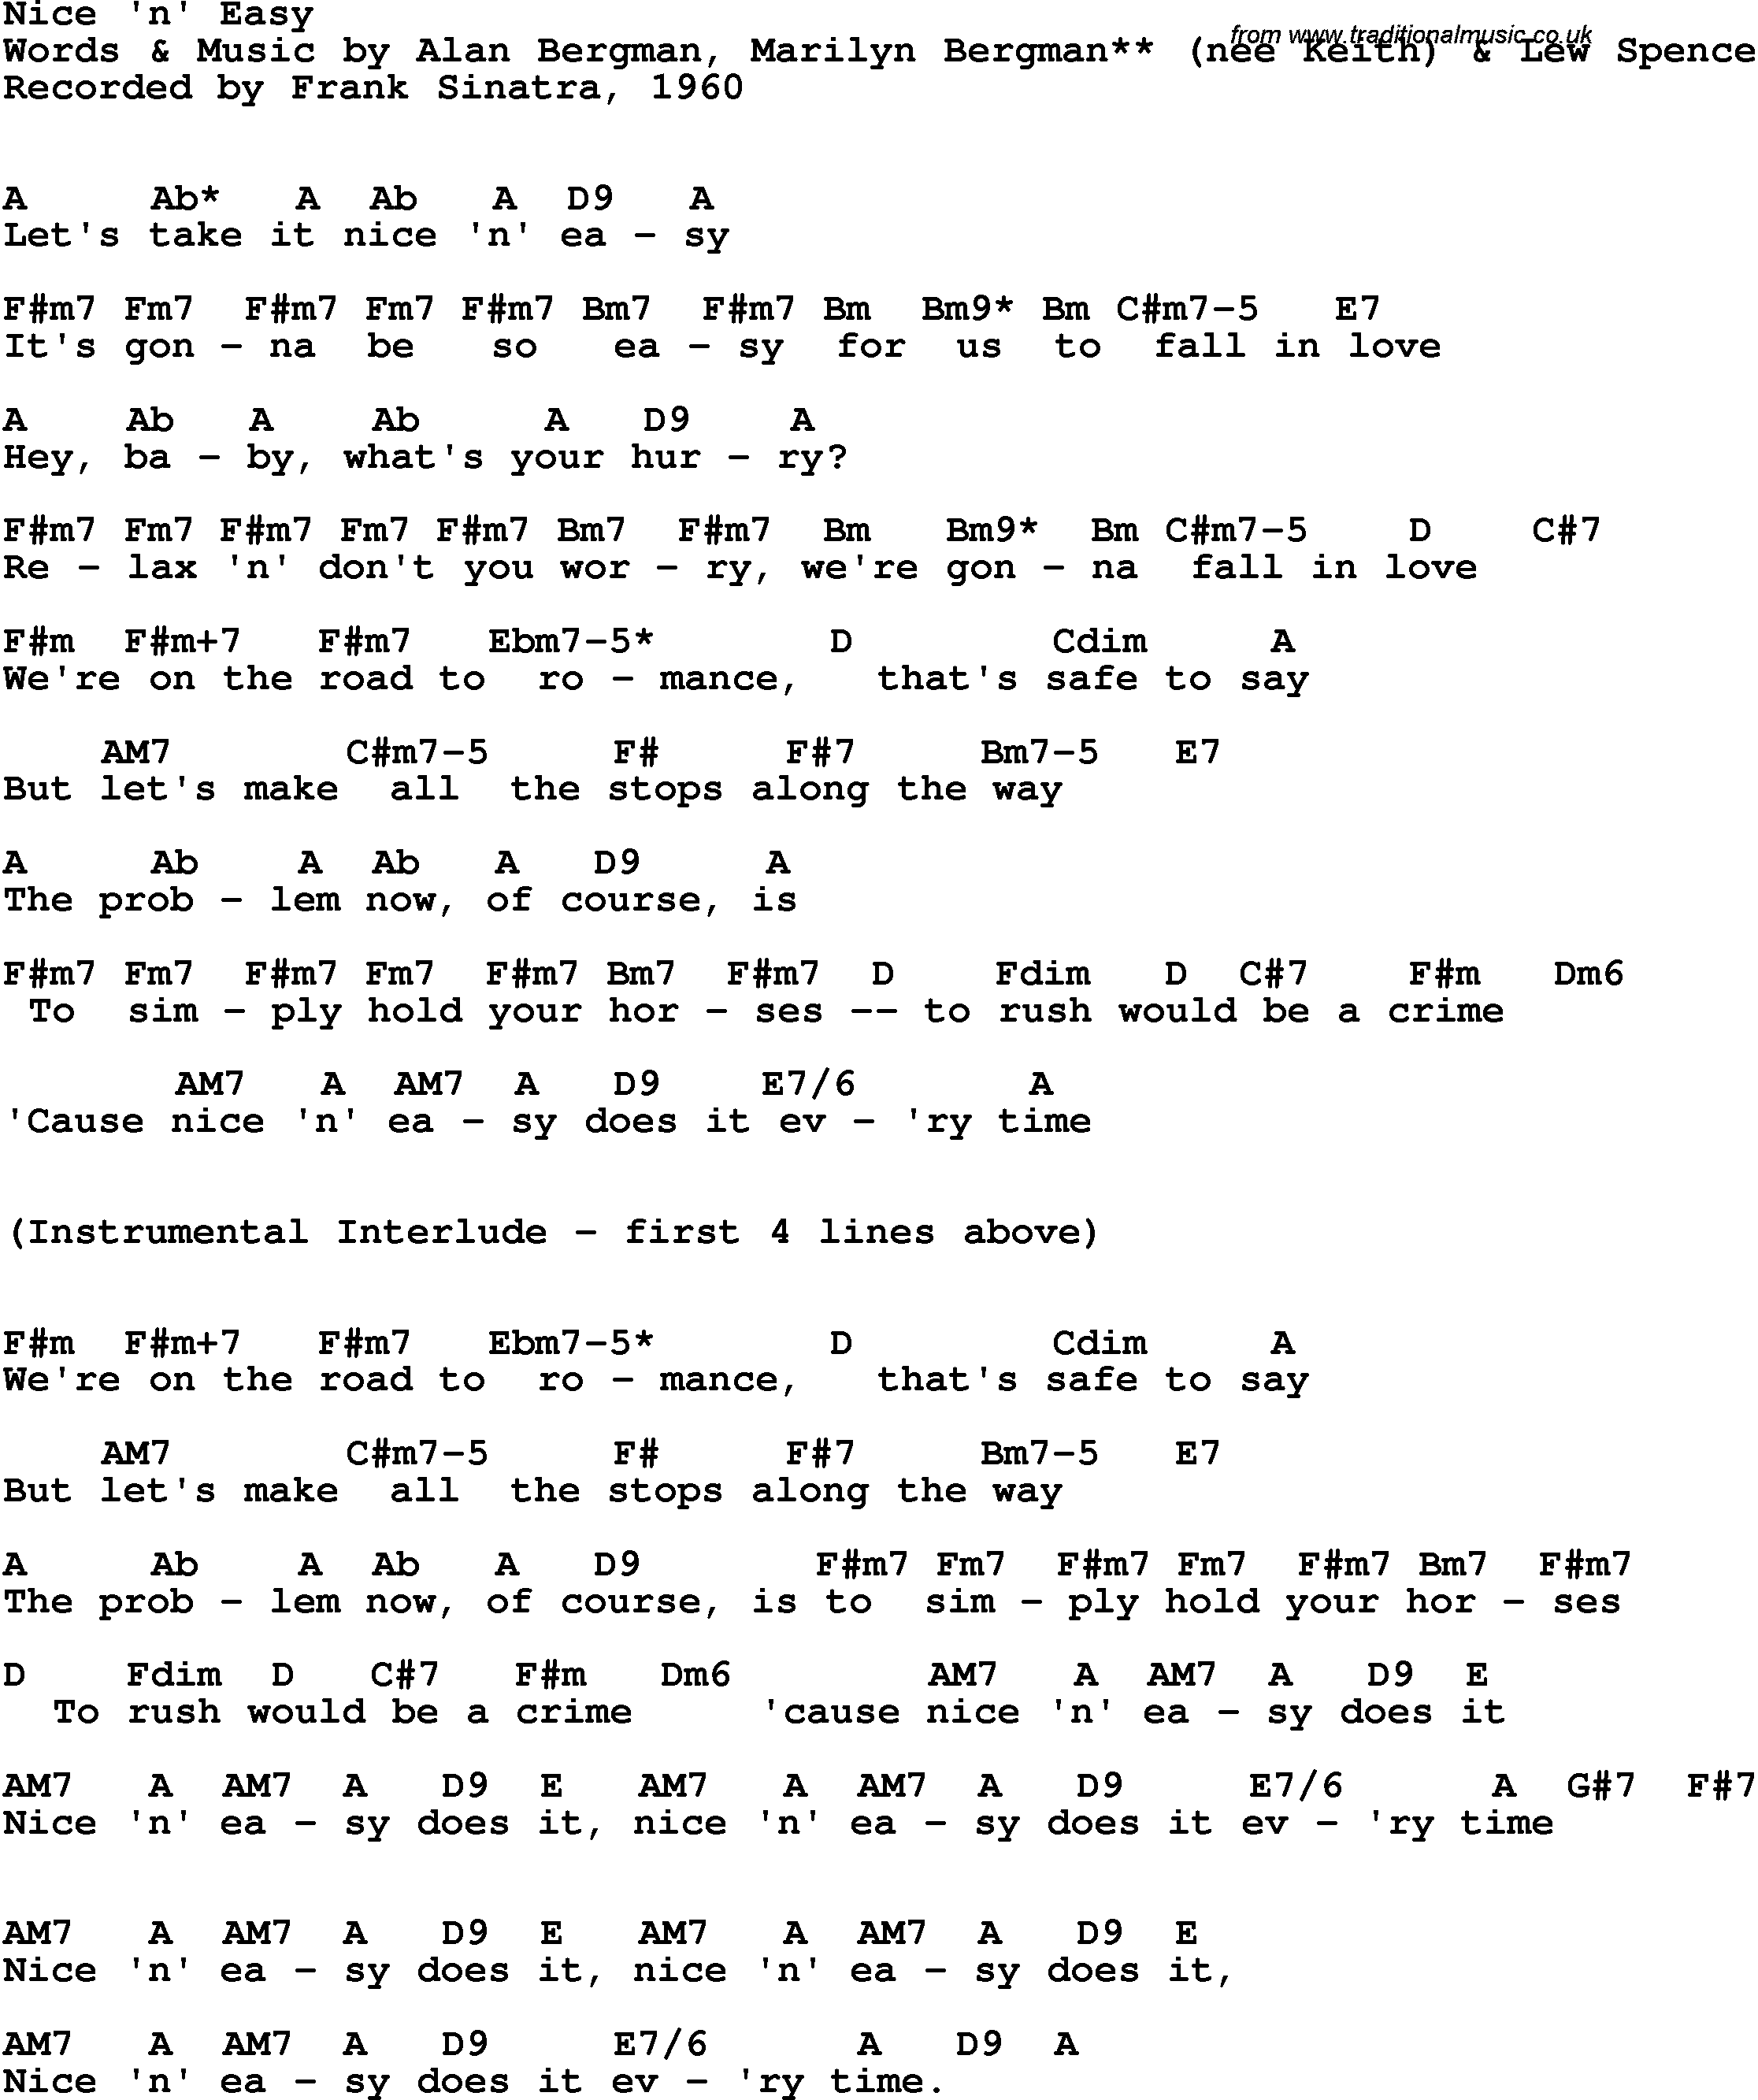 Song Lyrics with guitar chords for Nice 'n' Easy - Frank Sinatra, 1960